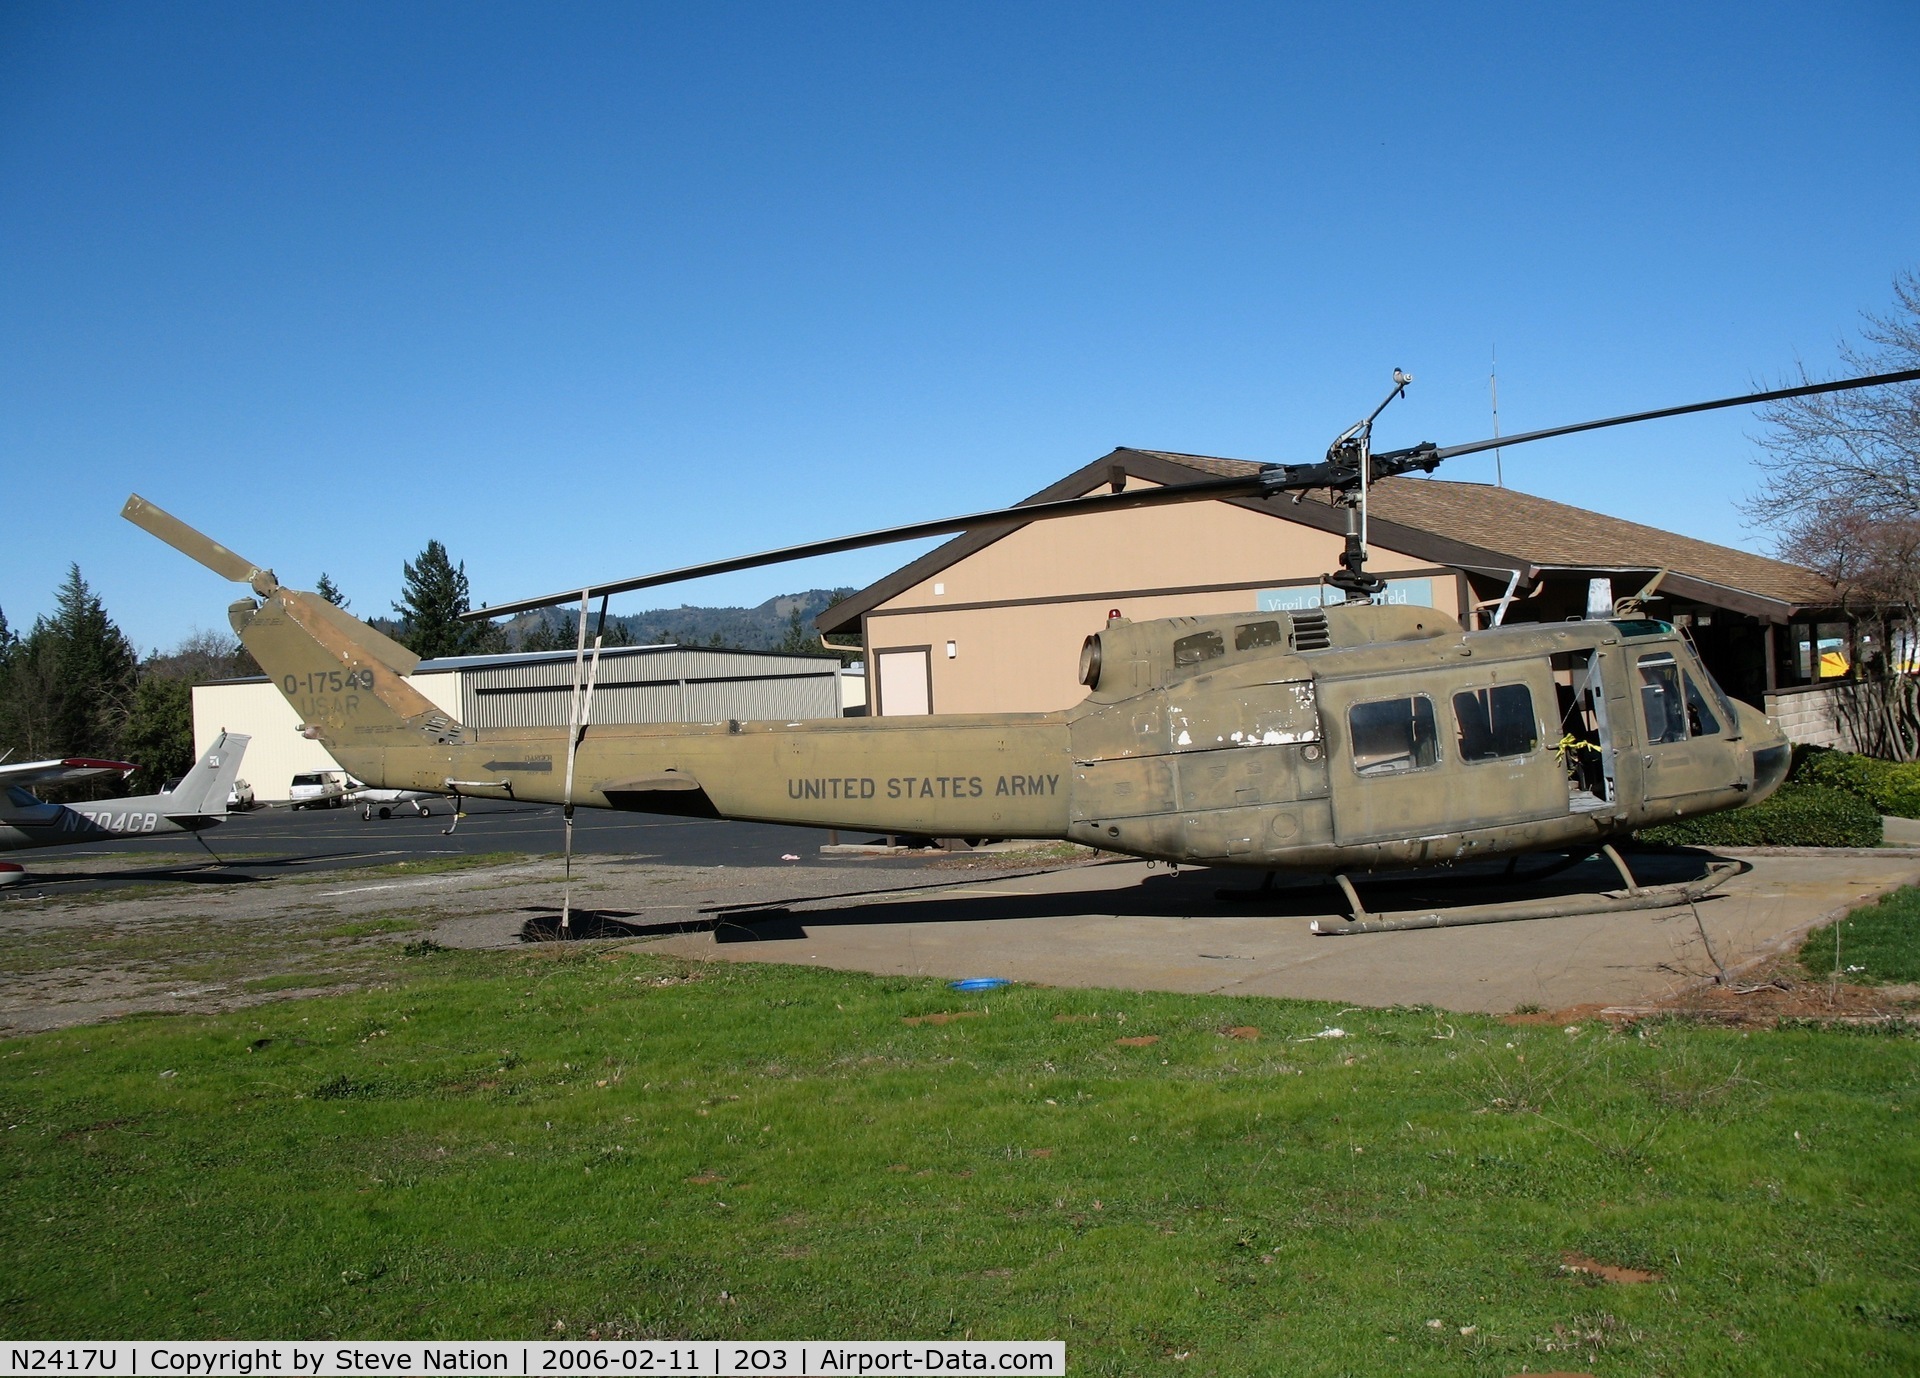 N2417U, Bell UH-1H Iroquois C/N 017549, Pacific Union College UH-1H USAR 0-17549 (not carrying N #) at Parrett Field (Angwin), CA